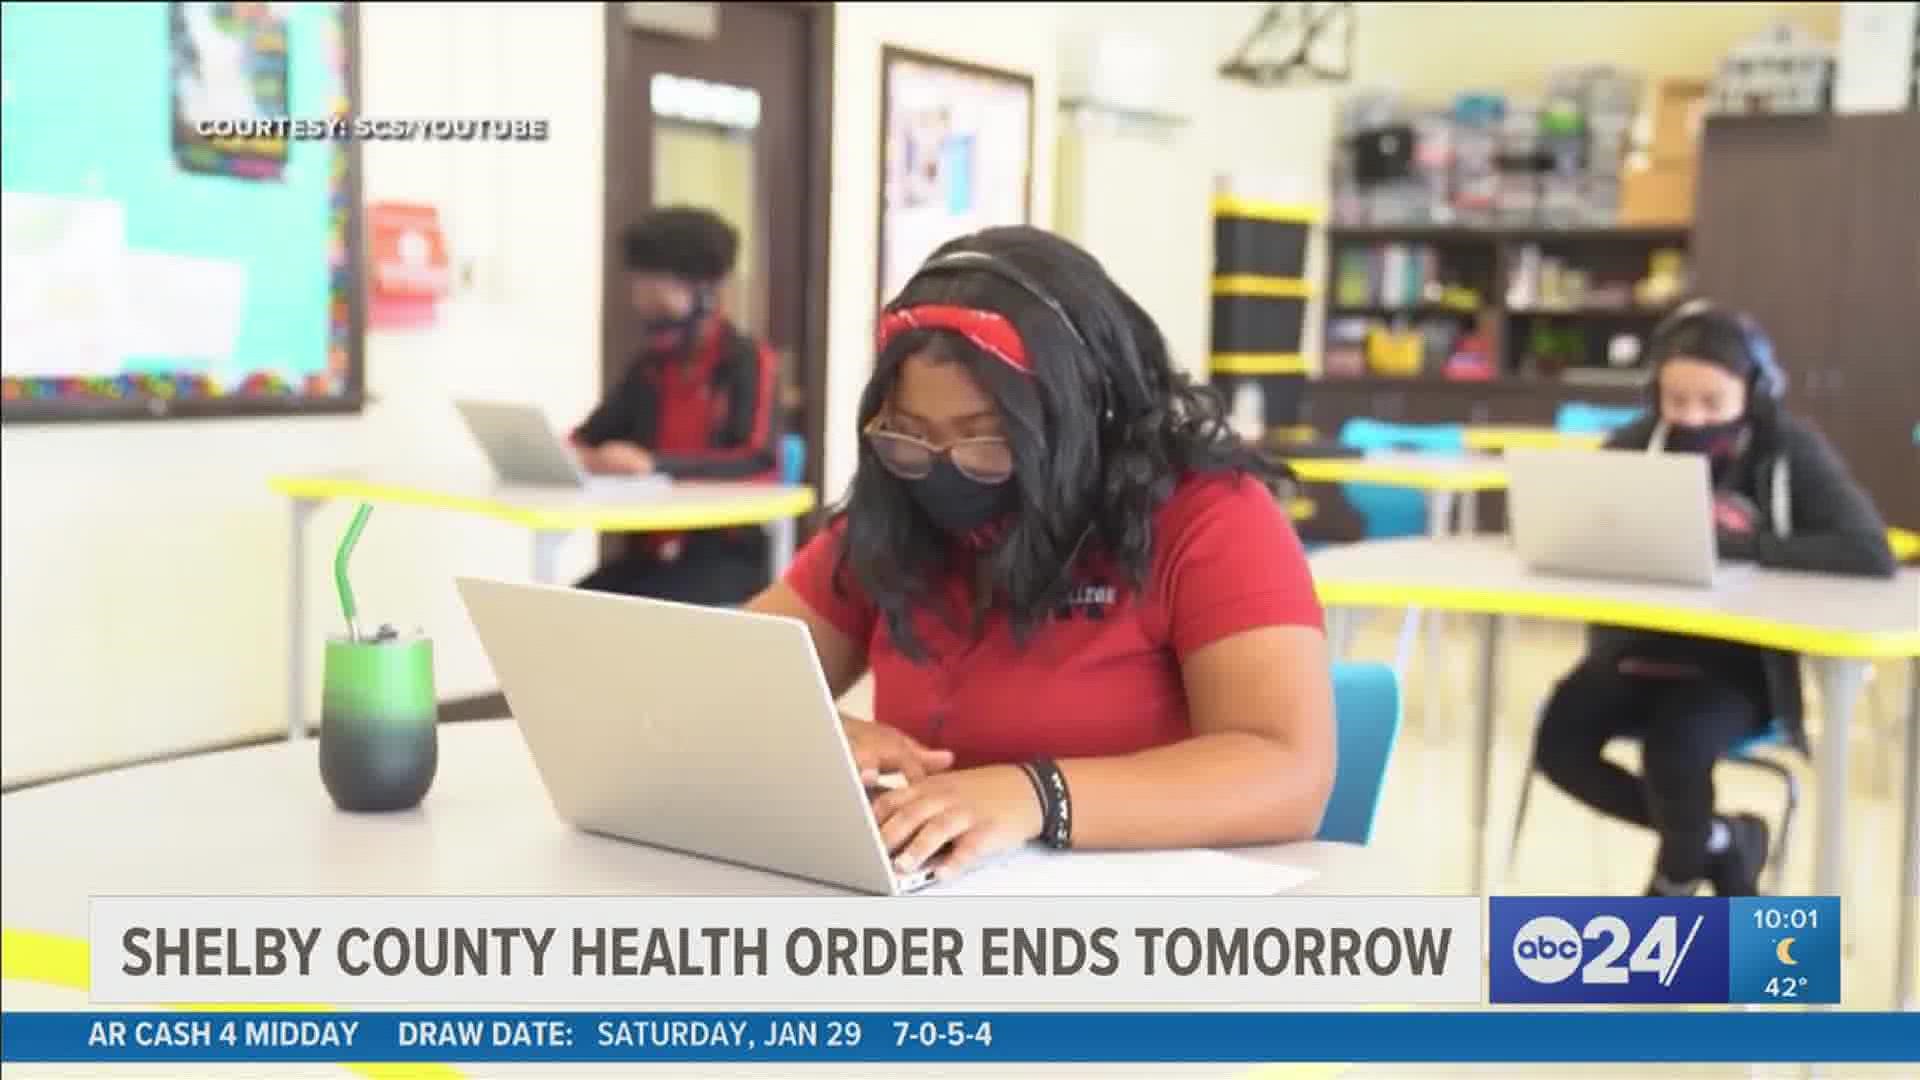 The Shelby County Health Department is coming out from under a health order for the first time in two years. That order protected school children.